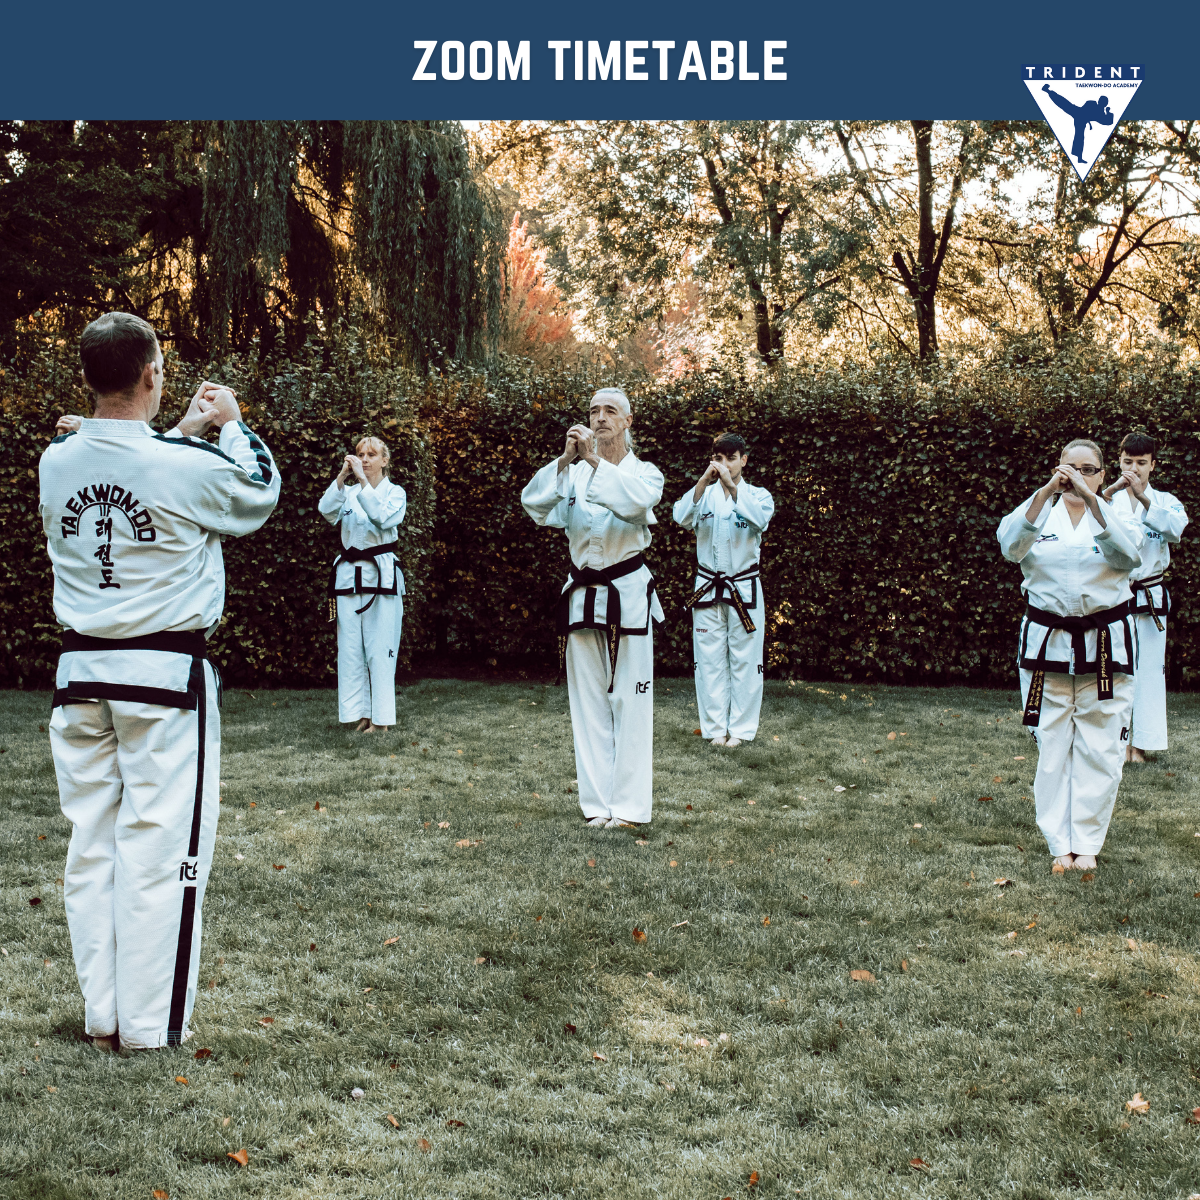 Zoom Timetable 